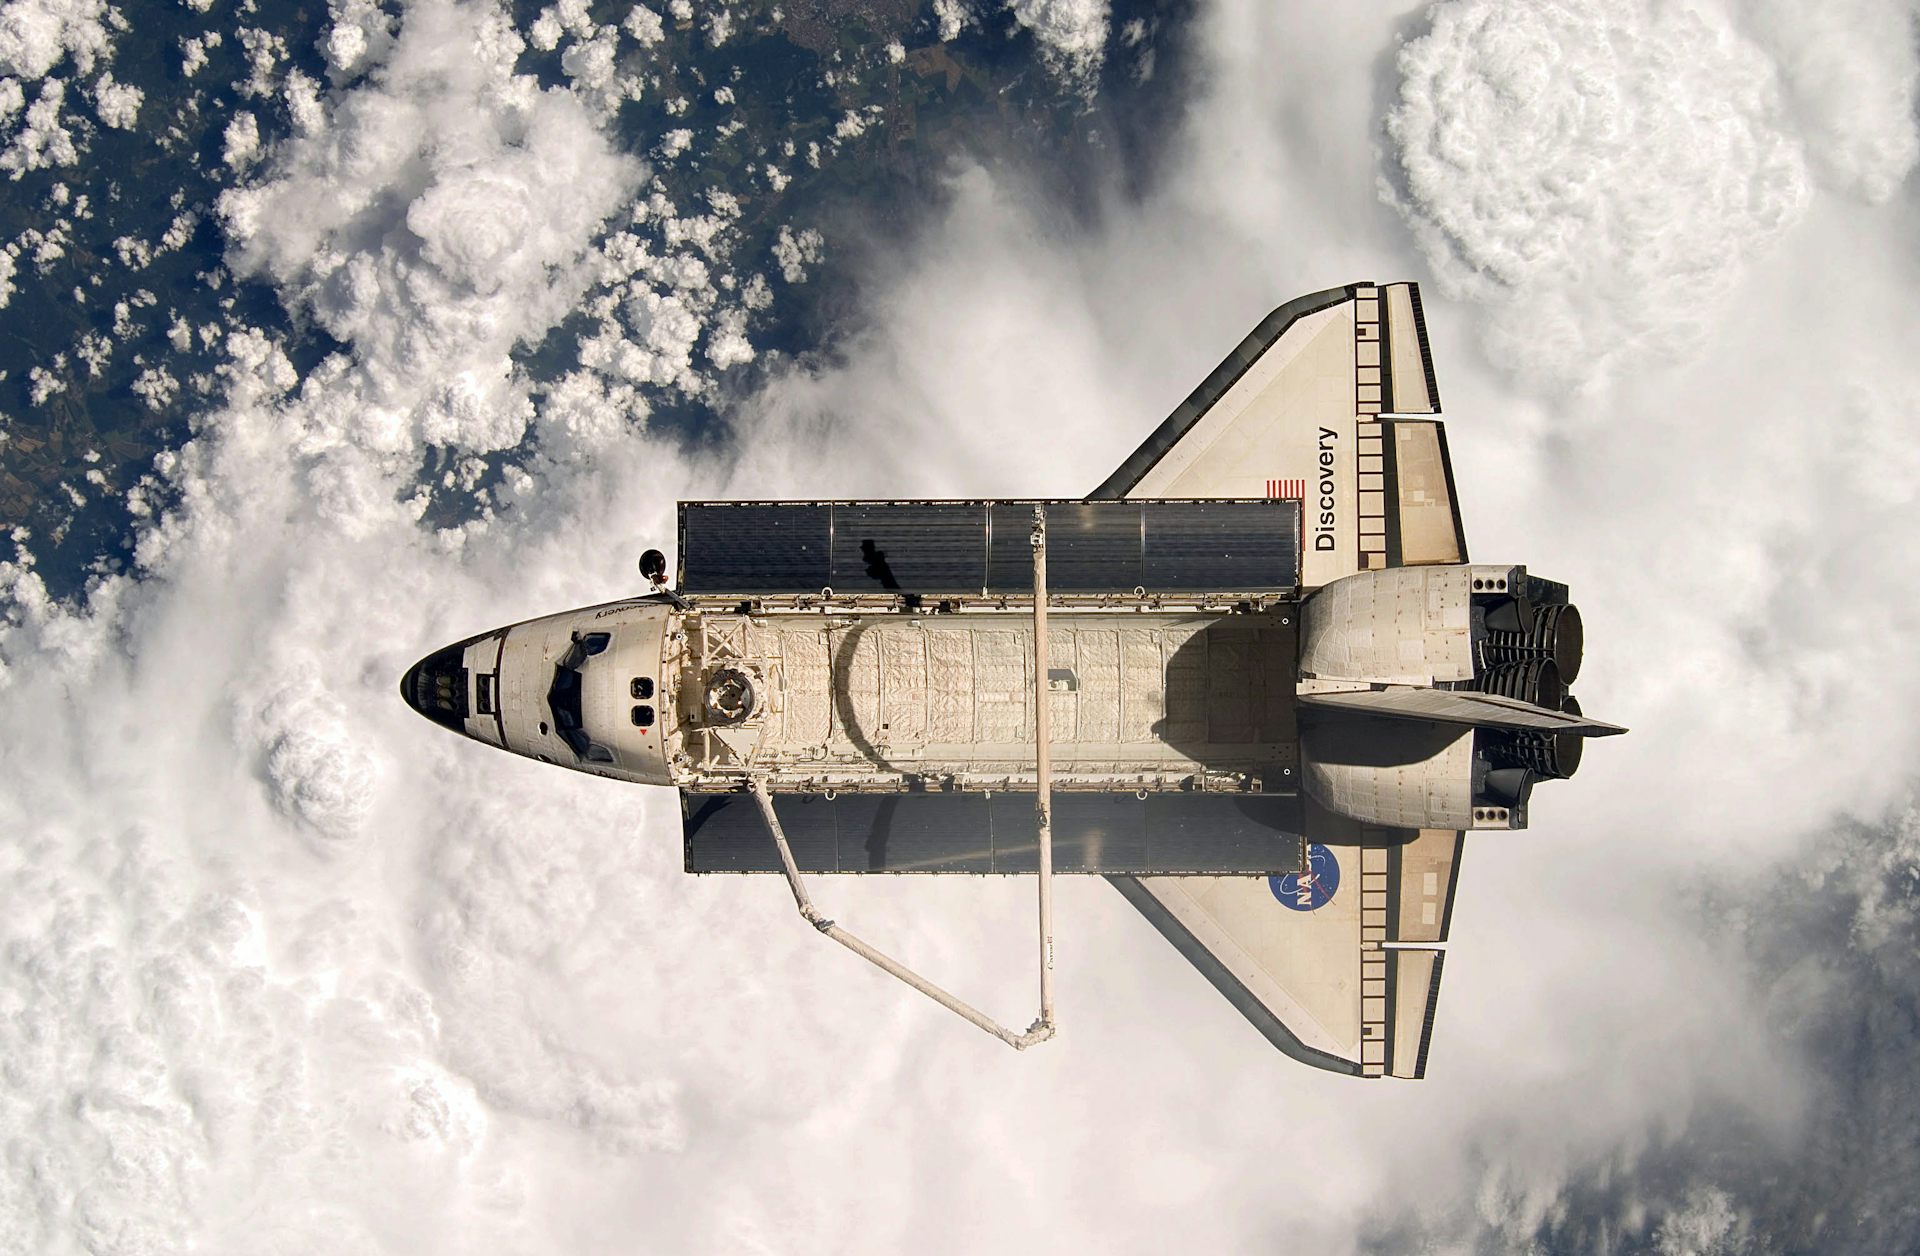 nasa space shuttle specifications